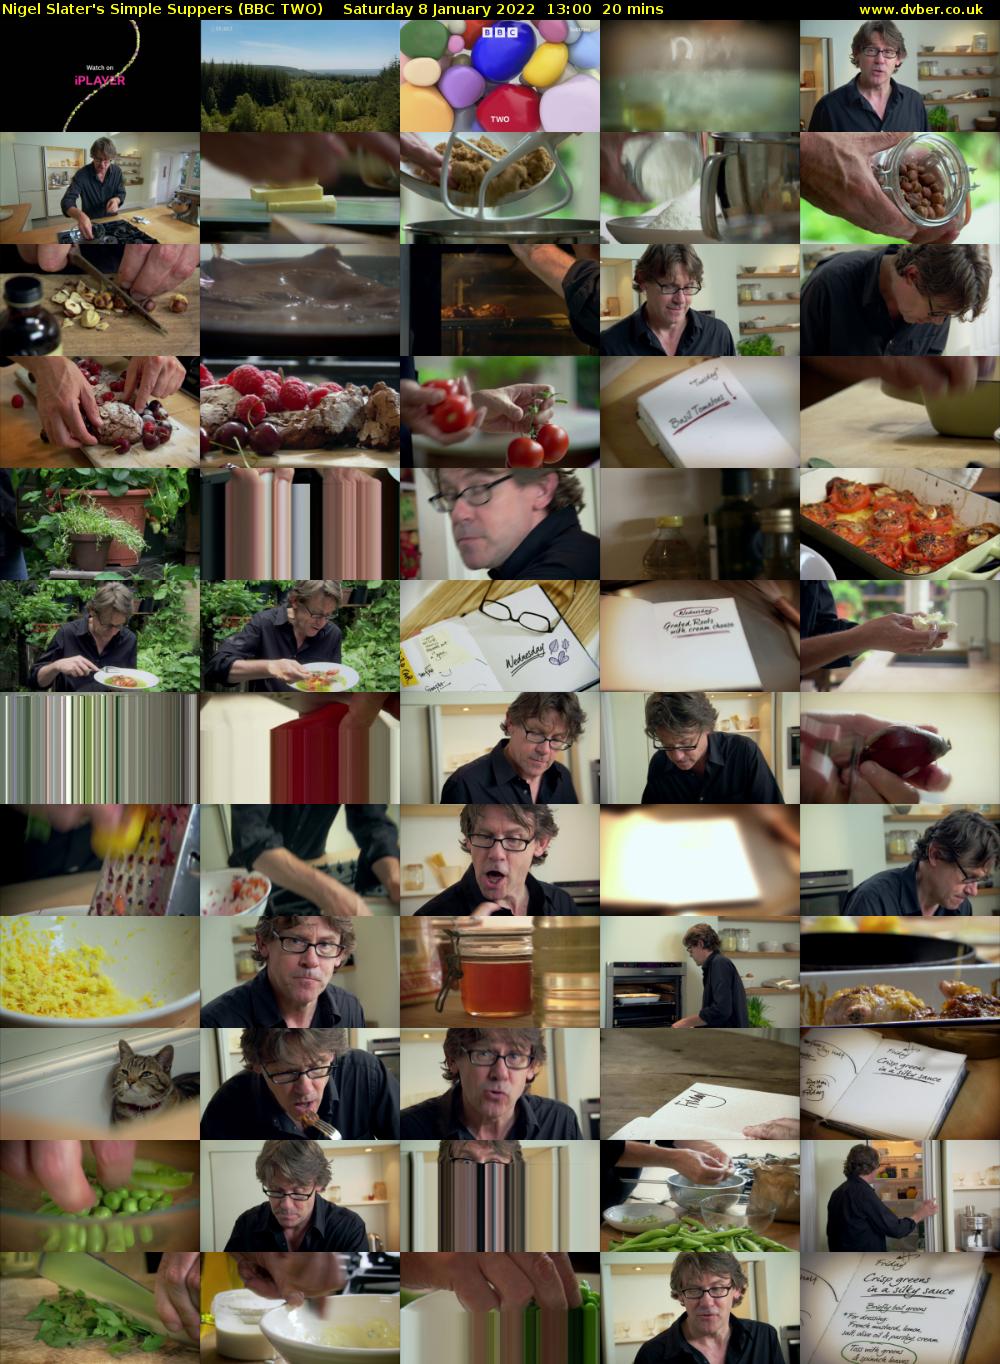 Nigel Slater's Simple Suppers (BBC TWO) Saturday 8 January 2022 13:00 - 13:20